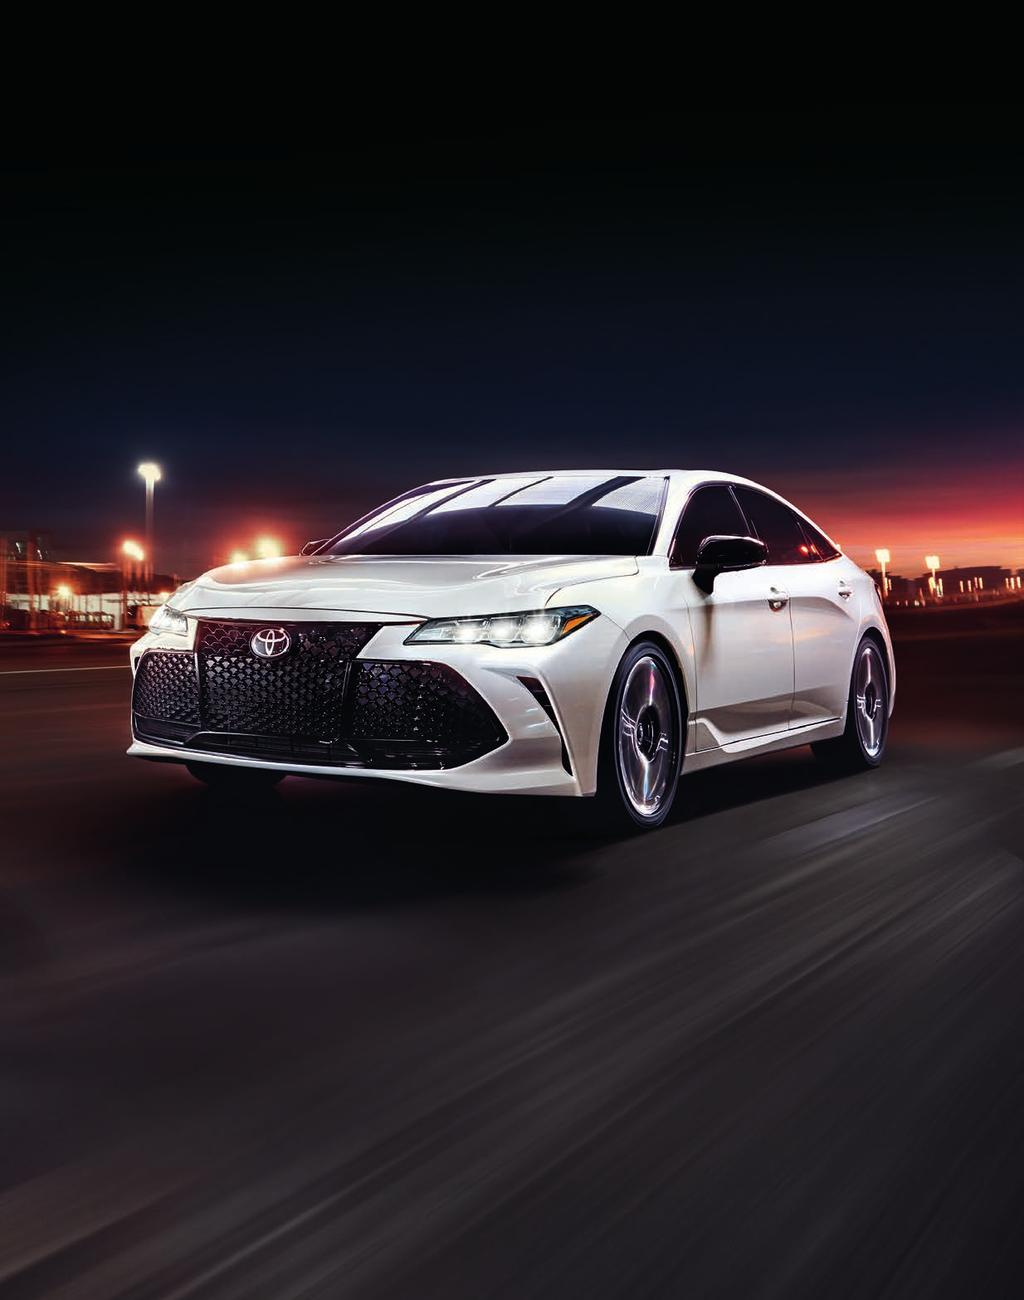 RESTYLED. REFINED. REMARKABLE. THE ALL-NEW. STUNNING IN EVERY POSSIBLE WAY. The all-new 2019 Avalon has been completely restyled, making it perhaps the most beautiful Toyota ever.